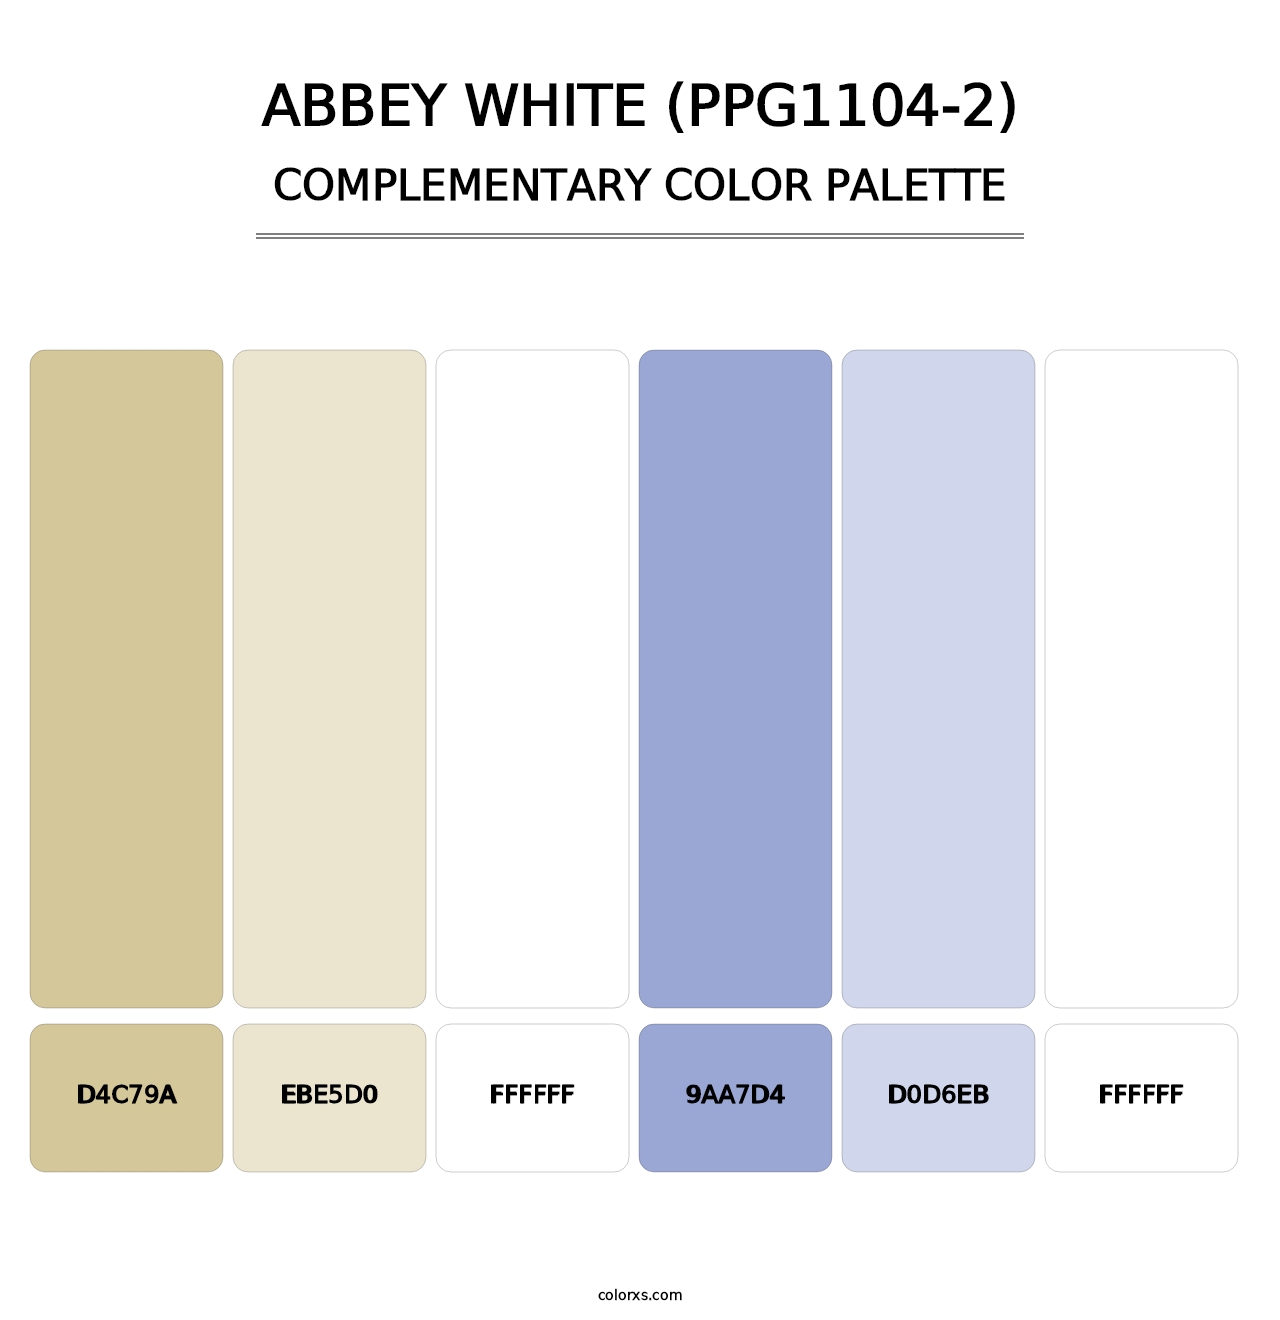 Abbey White (PPG1104-2) - Complementary Color Palette